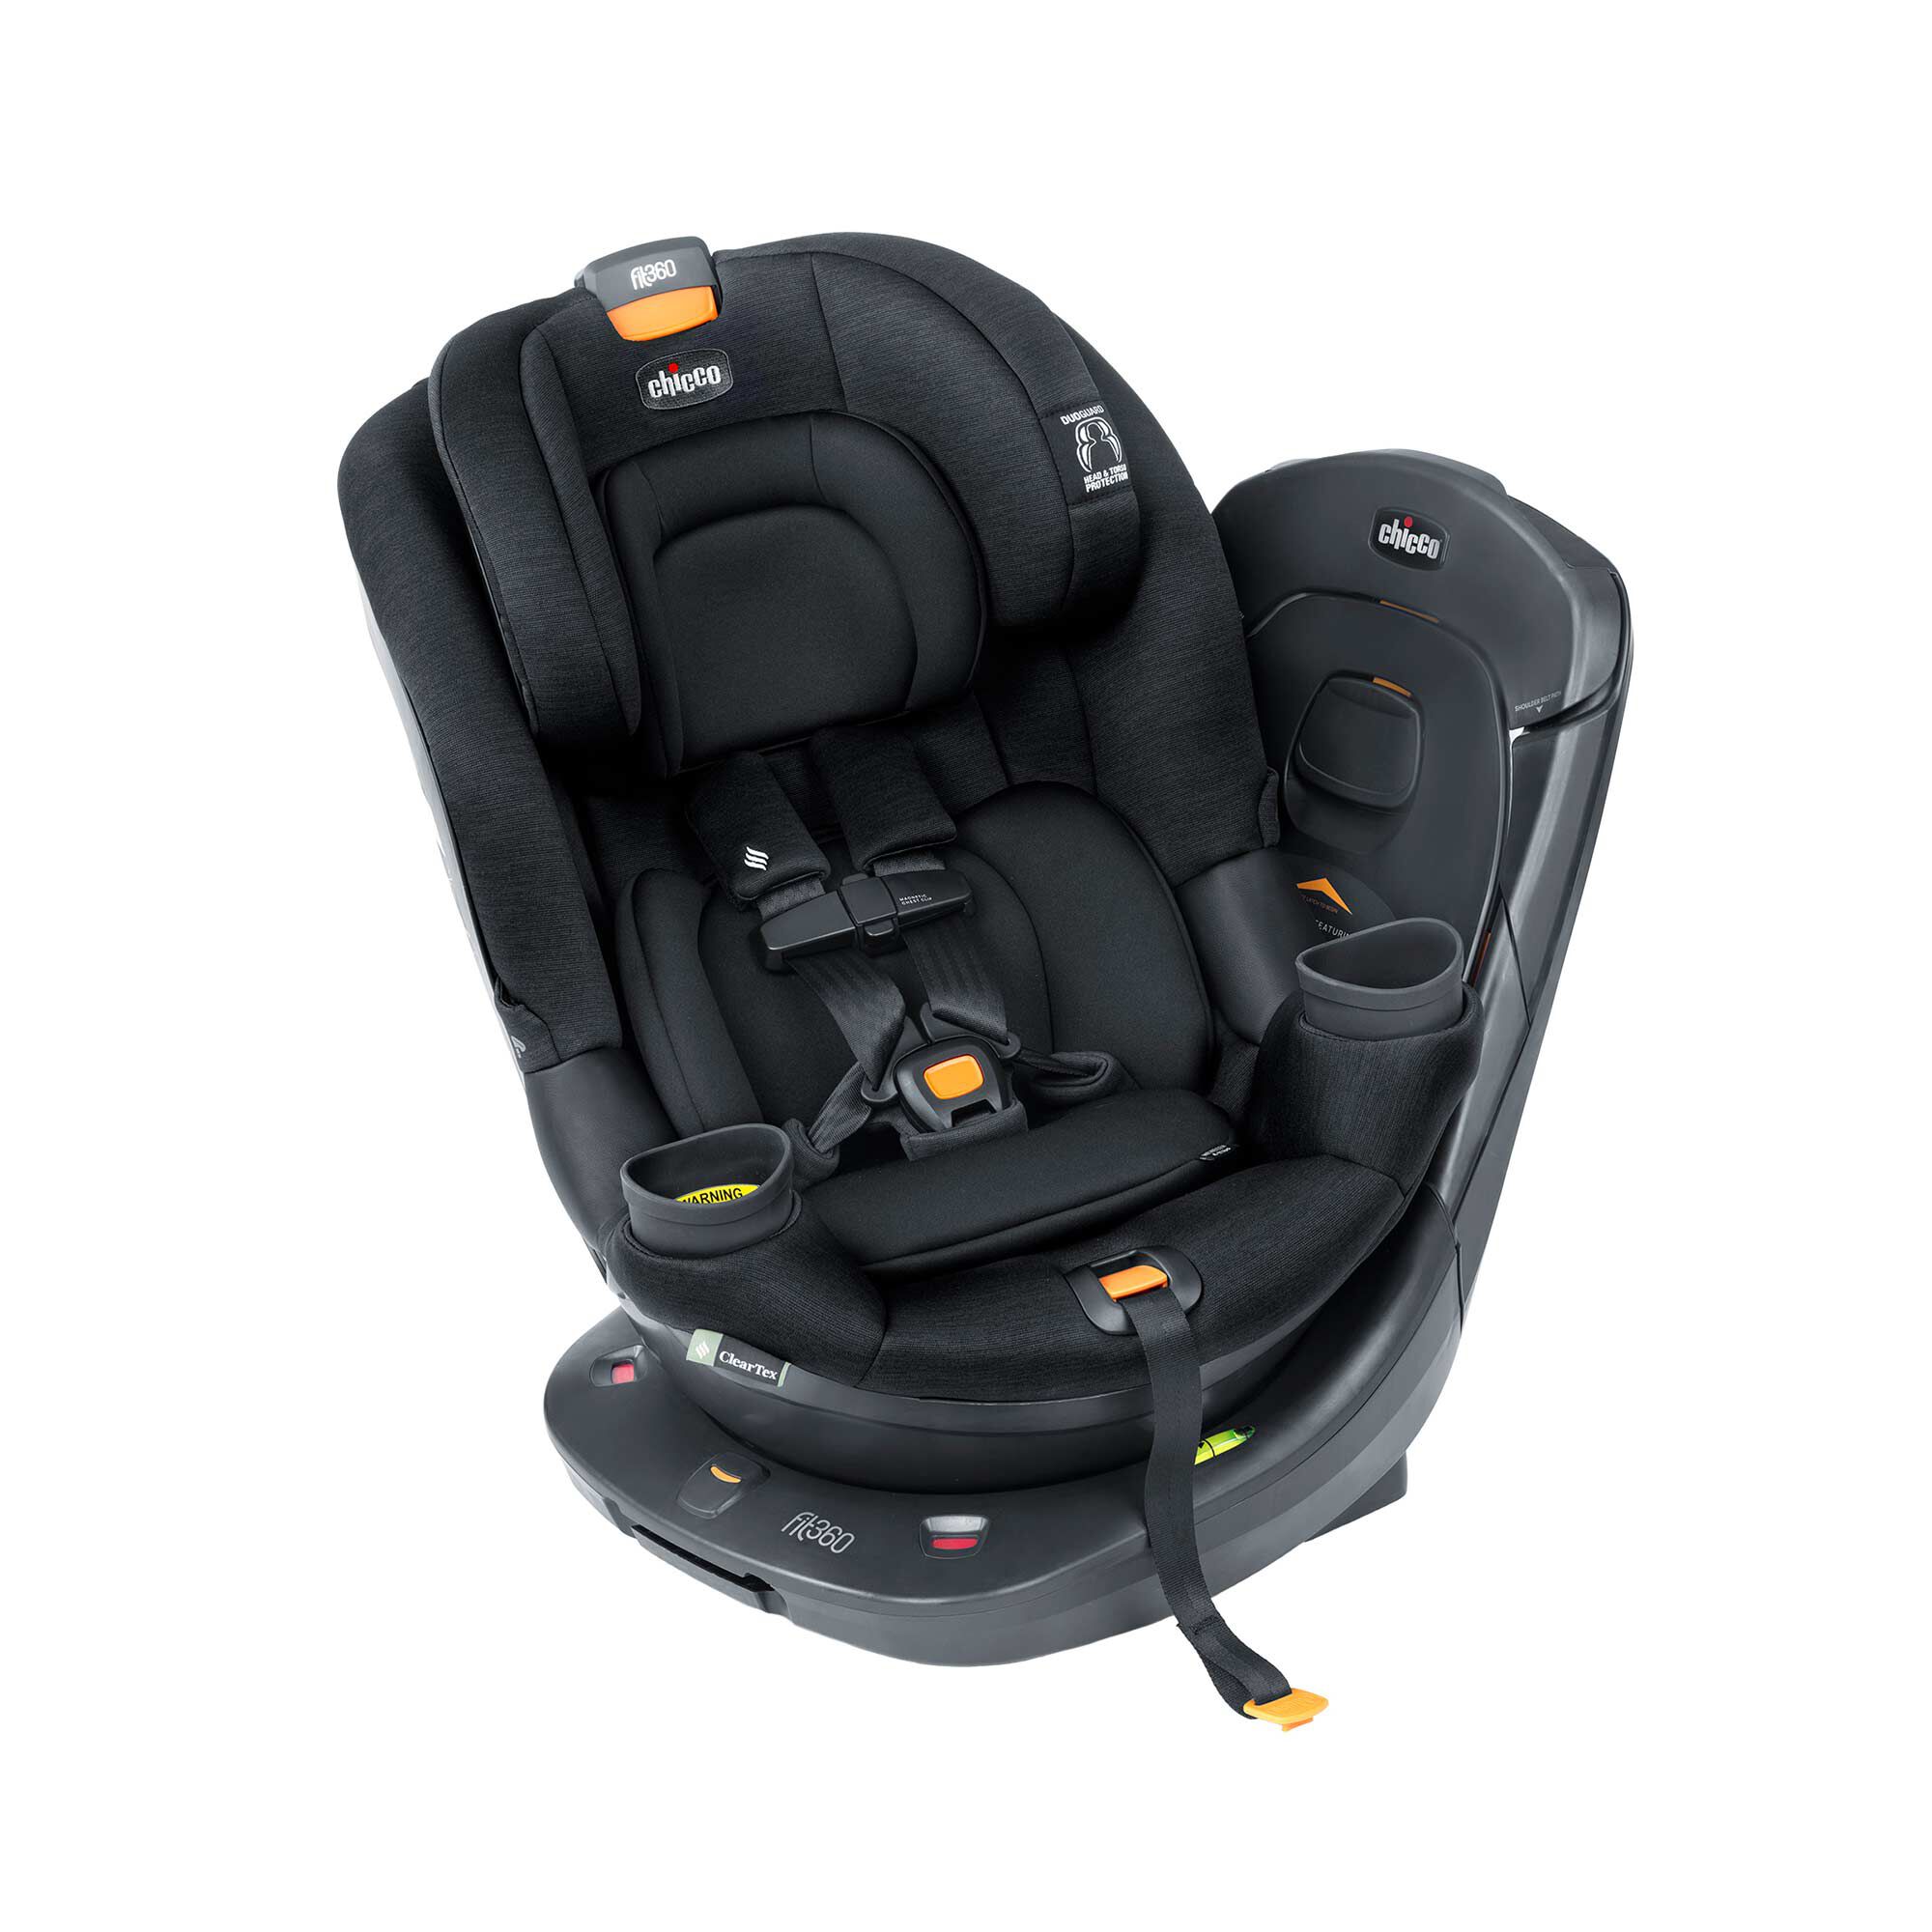 Fit360 ClearTex Rotating Convertible Car Seat - Black